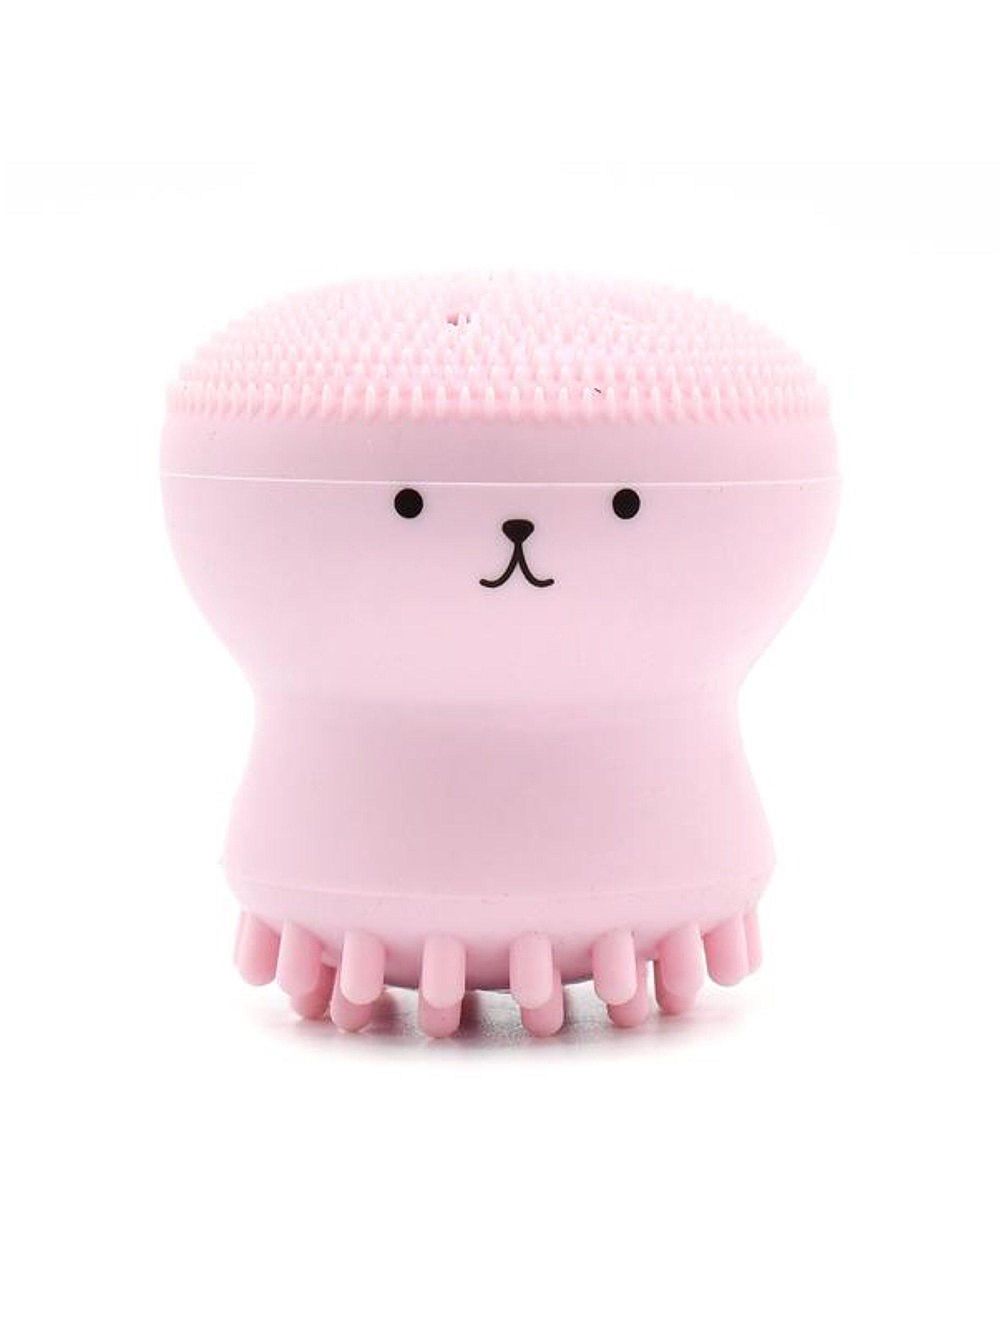 My Beauty Tool Jelly Fish Silicon Brush